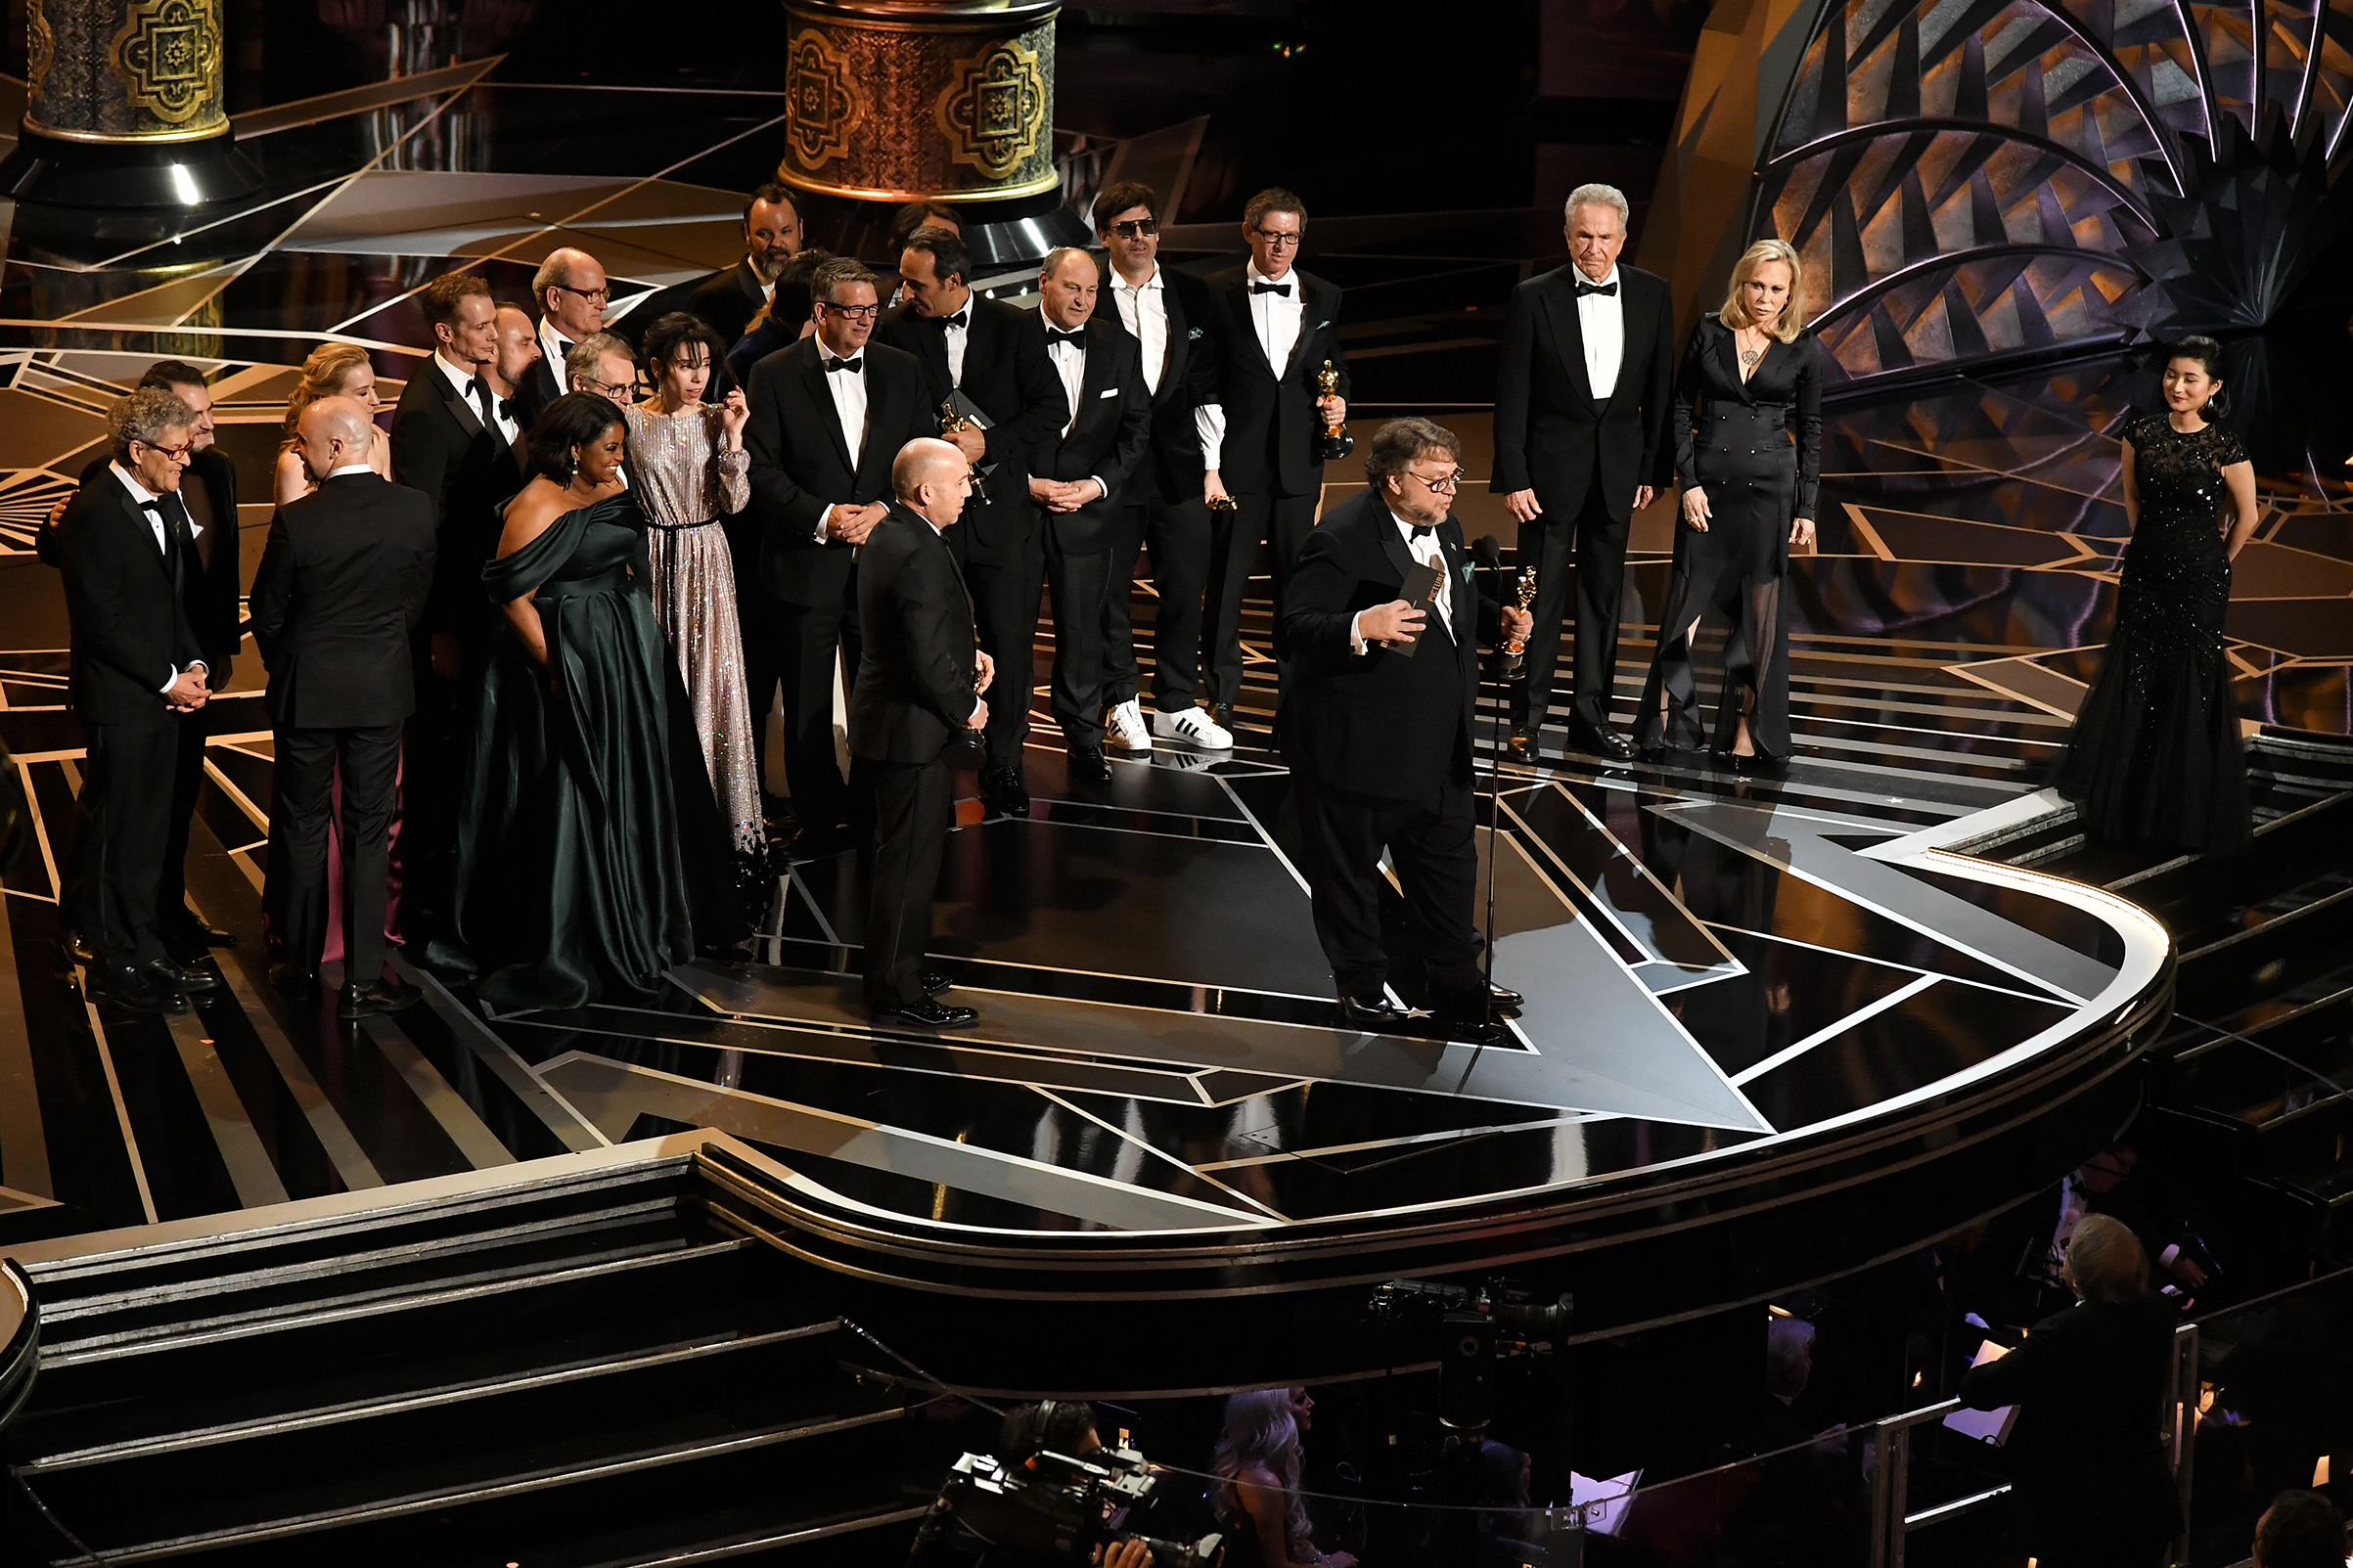 Guillermo del Toro with cast and crew 'The Shape Of Water' as they accept the award for Best Picture at the 90th Annual Academy Awards on March 4, 2018. (Rob Latour—Shutterstock)